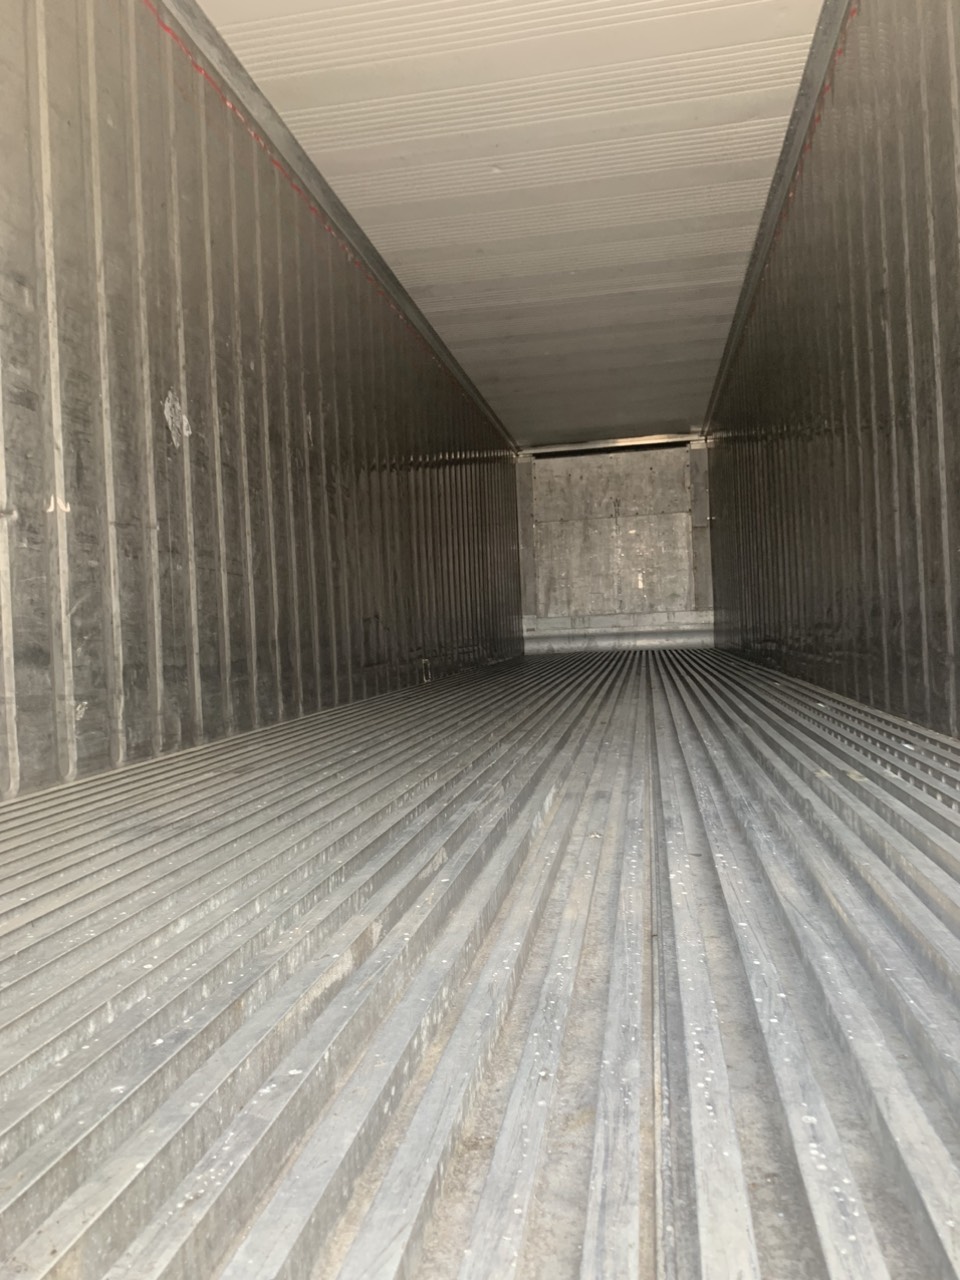 CONTAINER LẠNH 40RH WHLU7762987